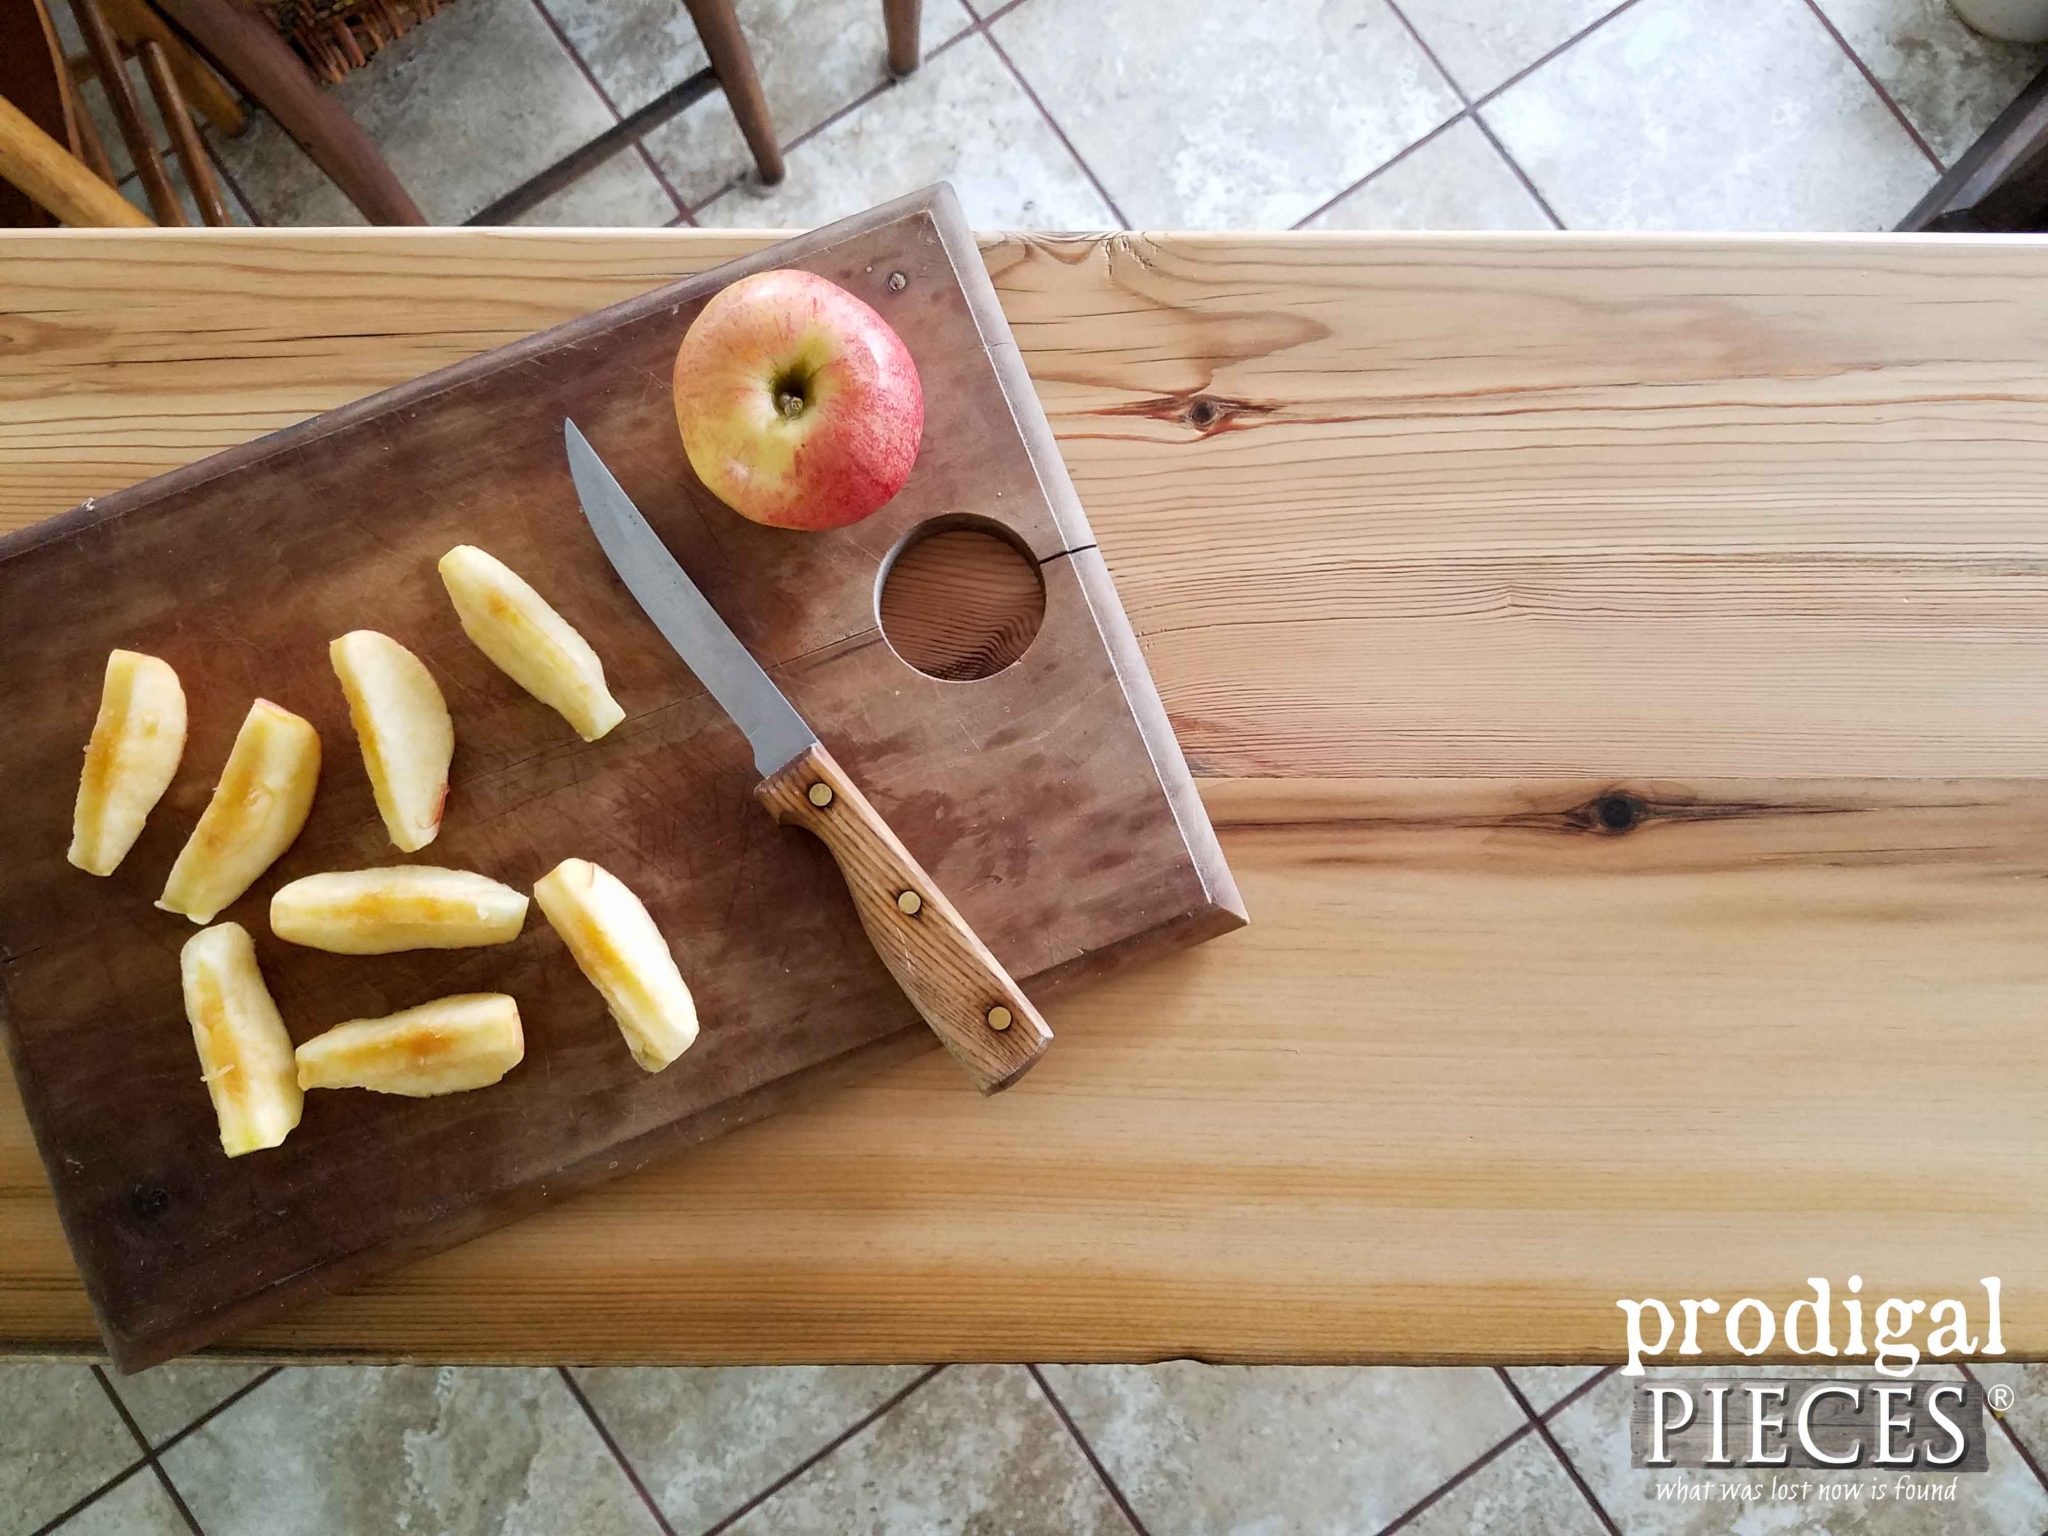 Reclaimed Wood Kitchen Cart Top by Prodigal Pieces | prodigalpieces.com